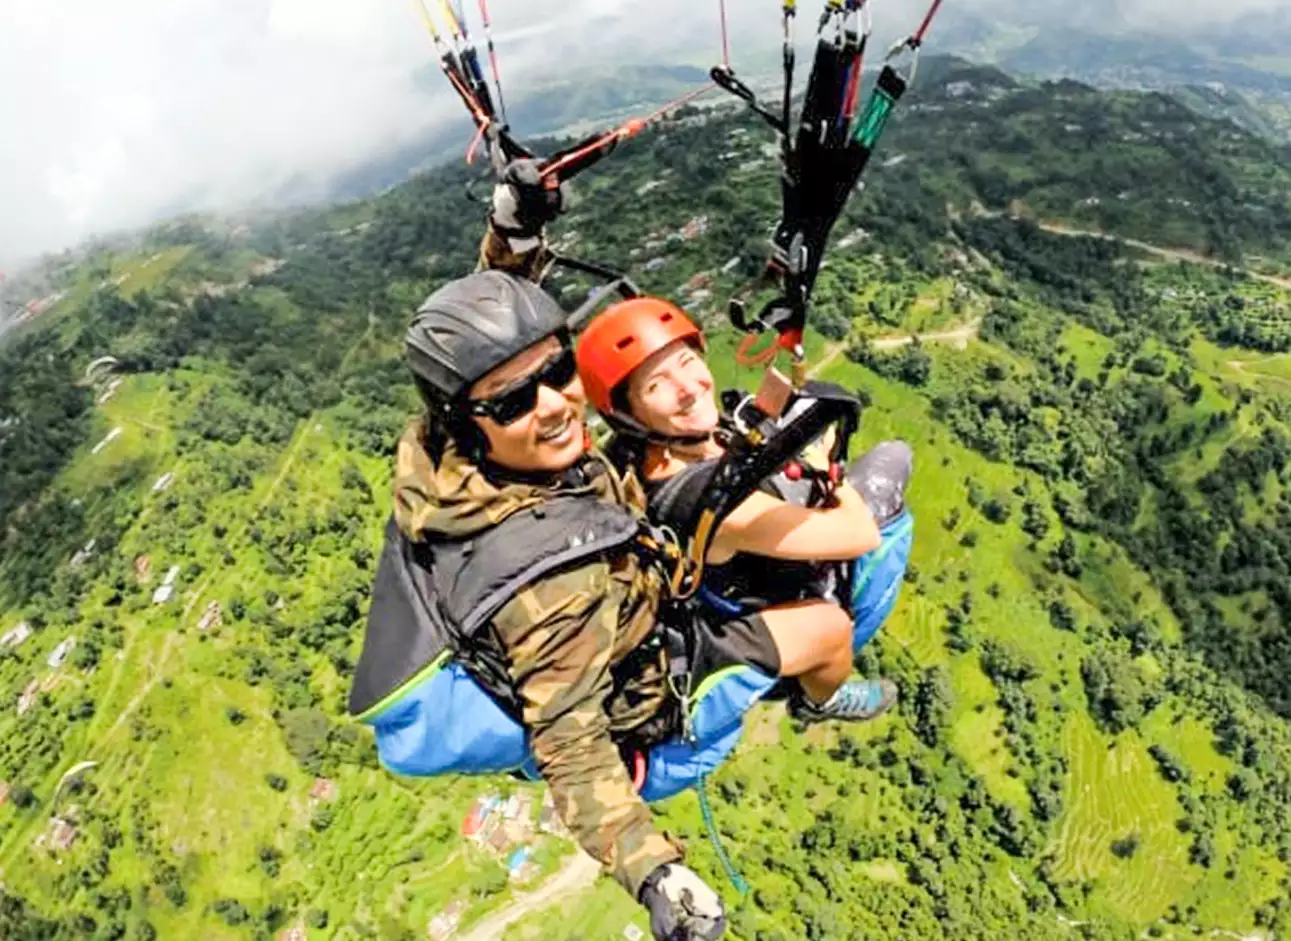 Paragliding - Soar high and experience the thrill of paragliding flights